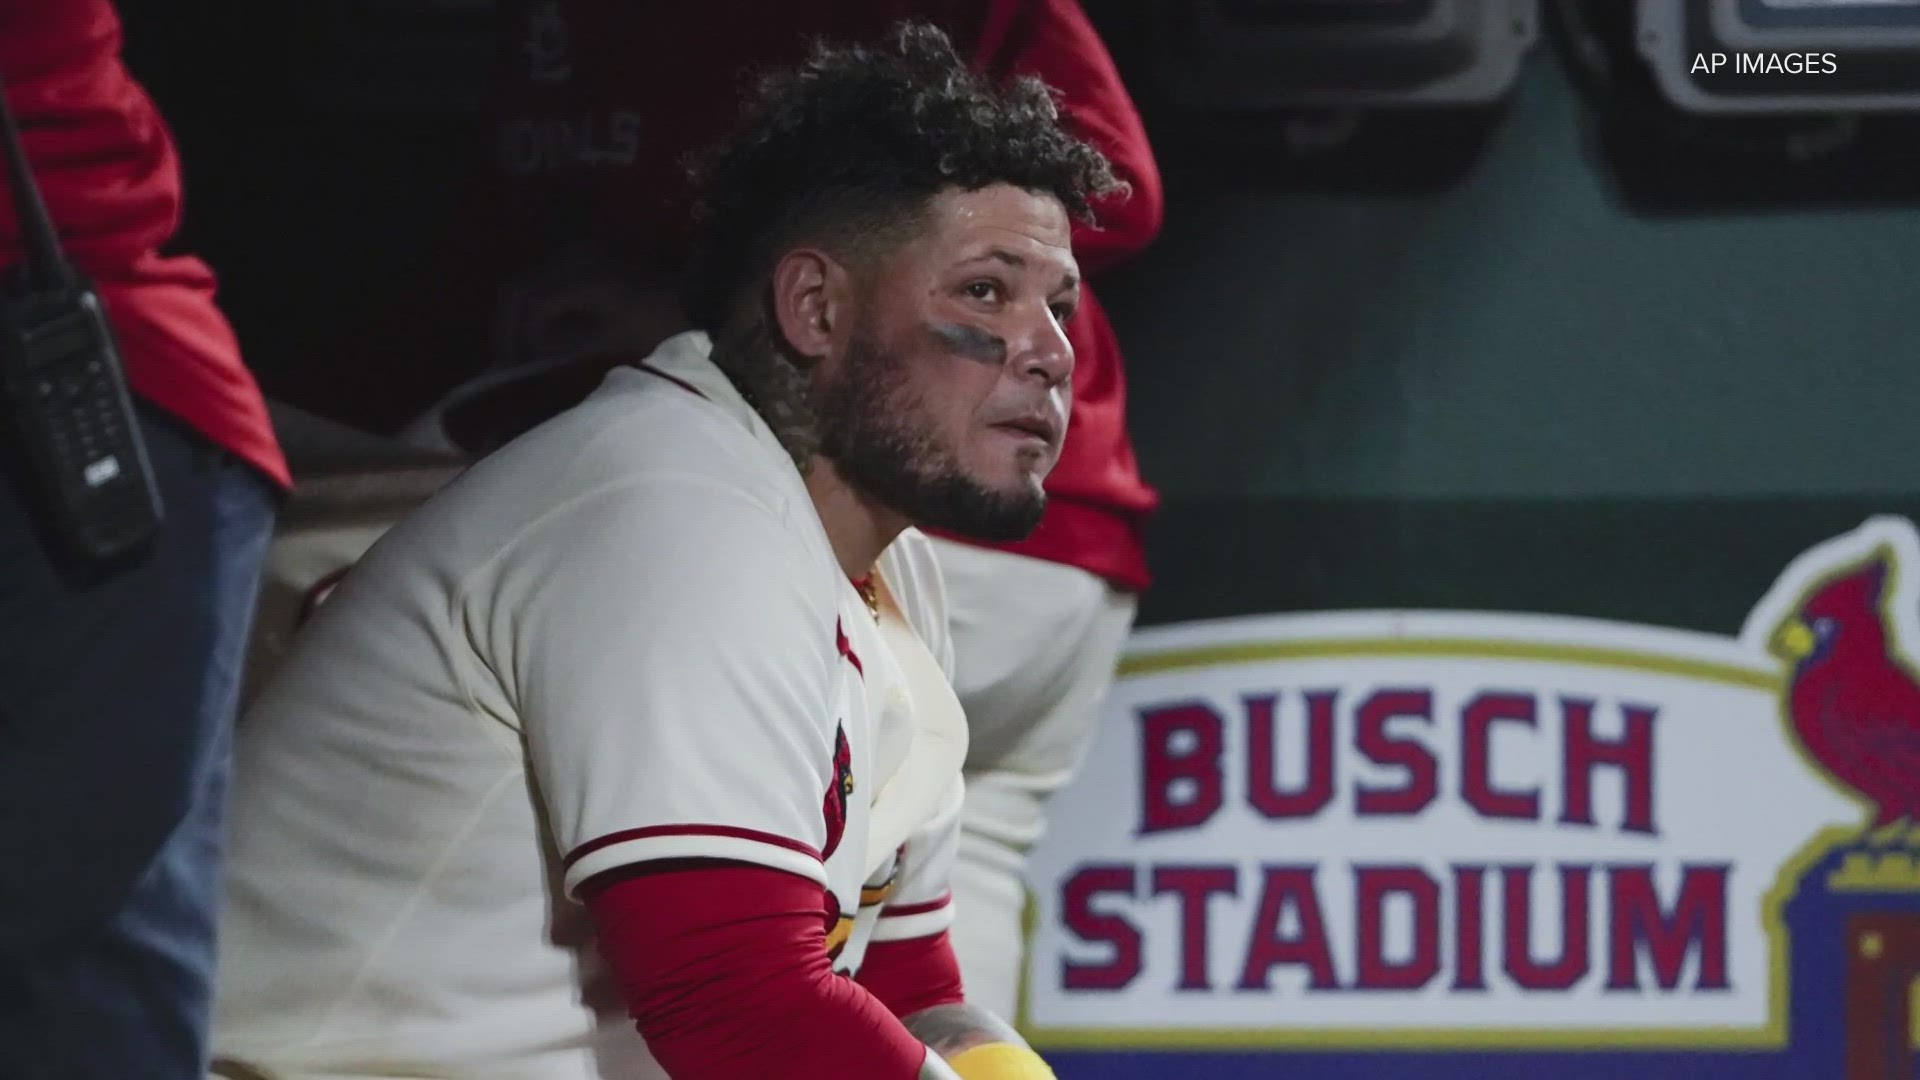 Will Yadier Molina return to the St. Louis Cardinals on the coaching staff?